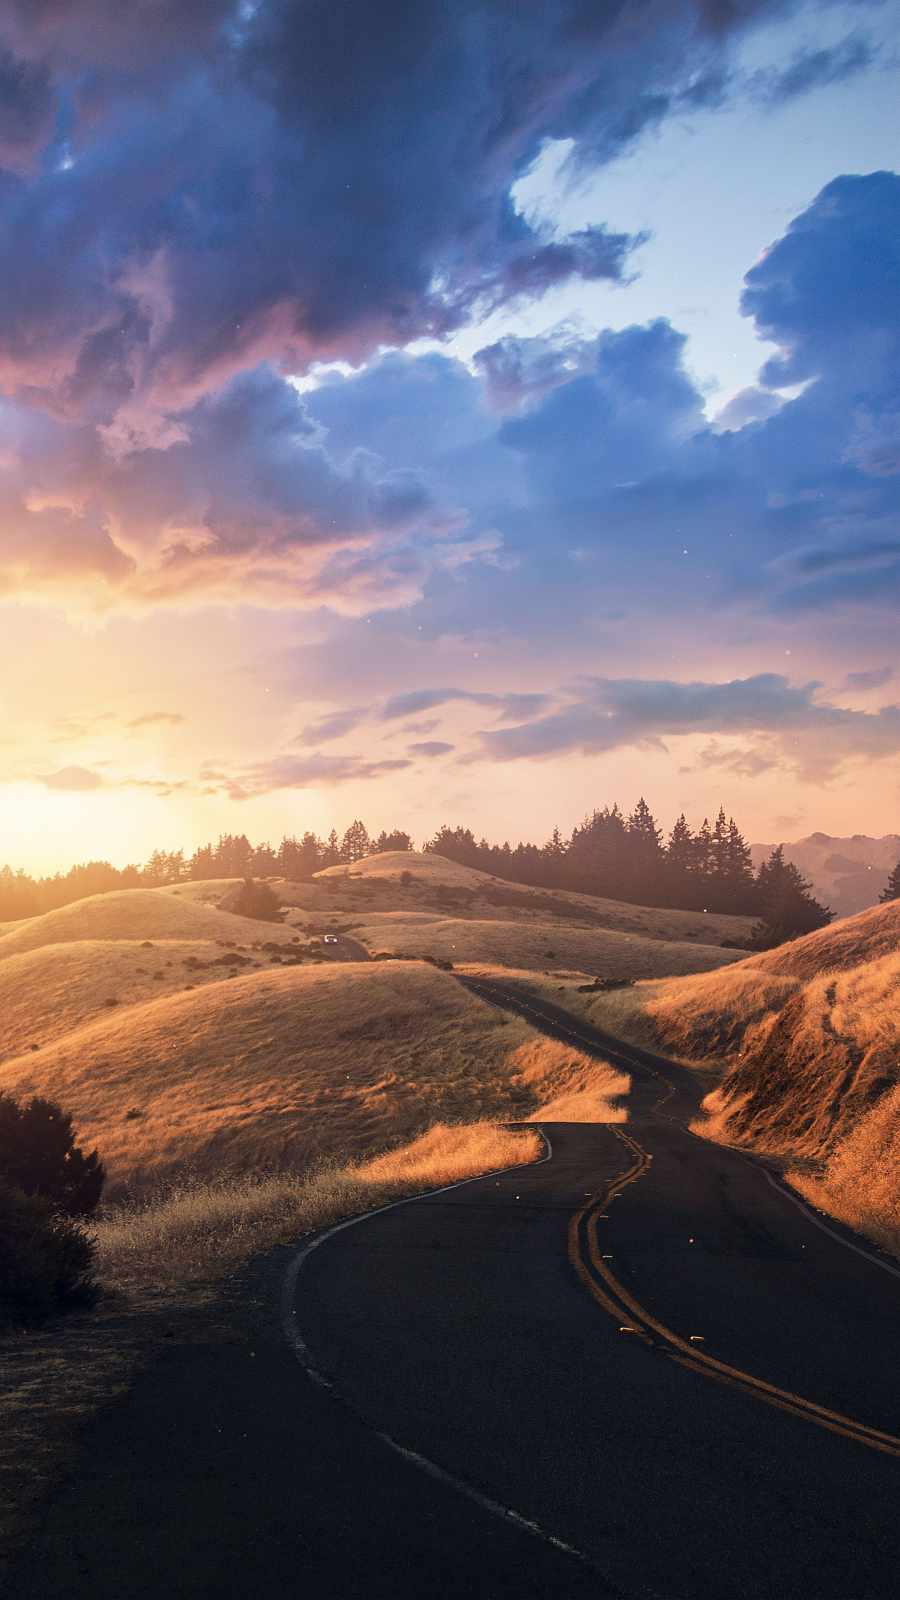 Nature Landscape Road - IPhone Wallpapers : iPhone Wallpapers